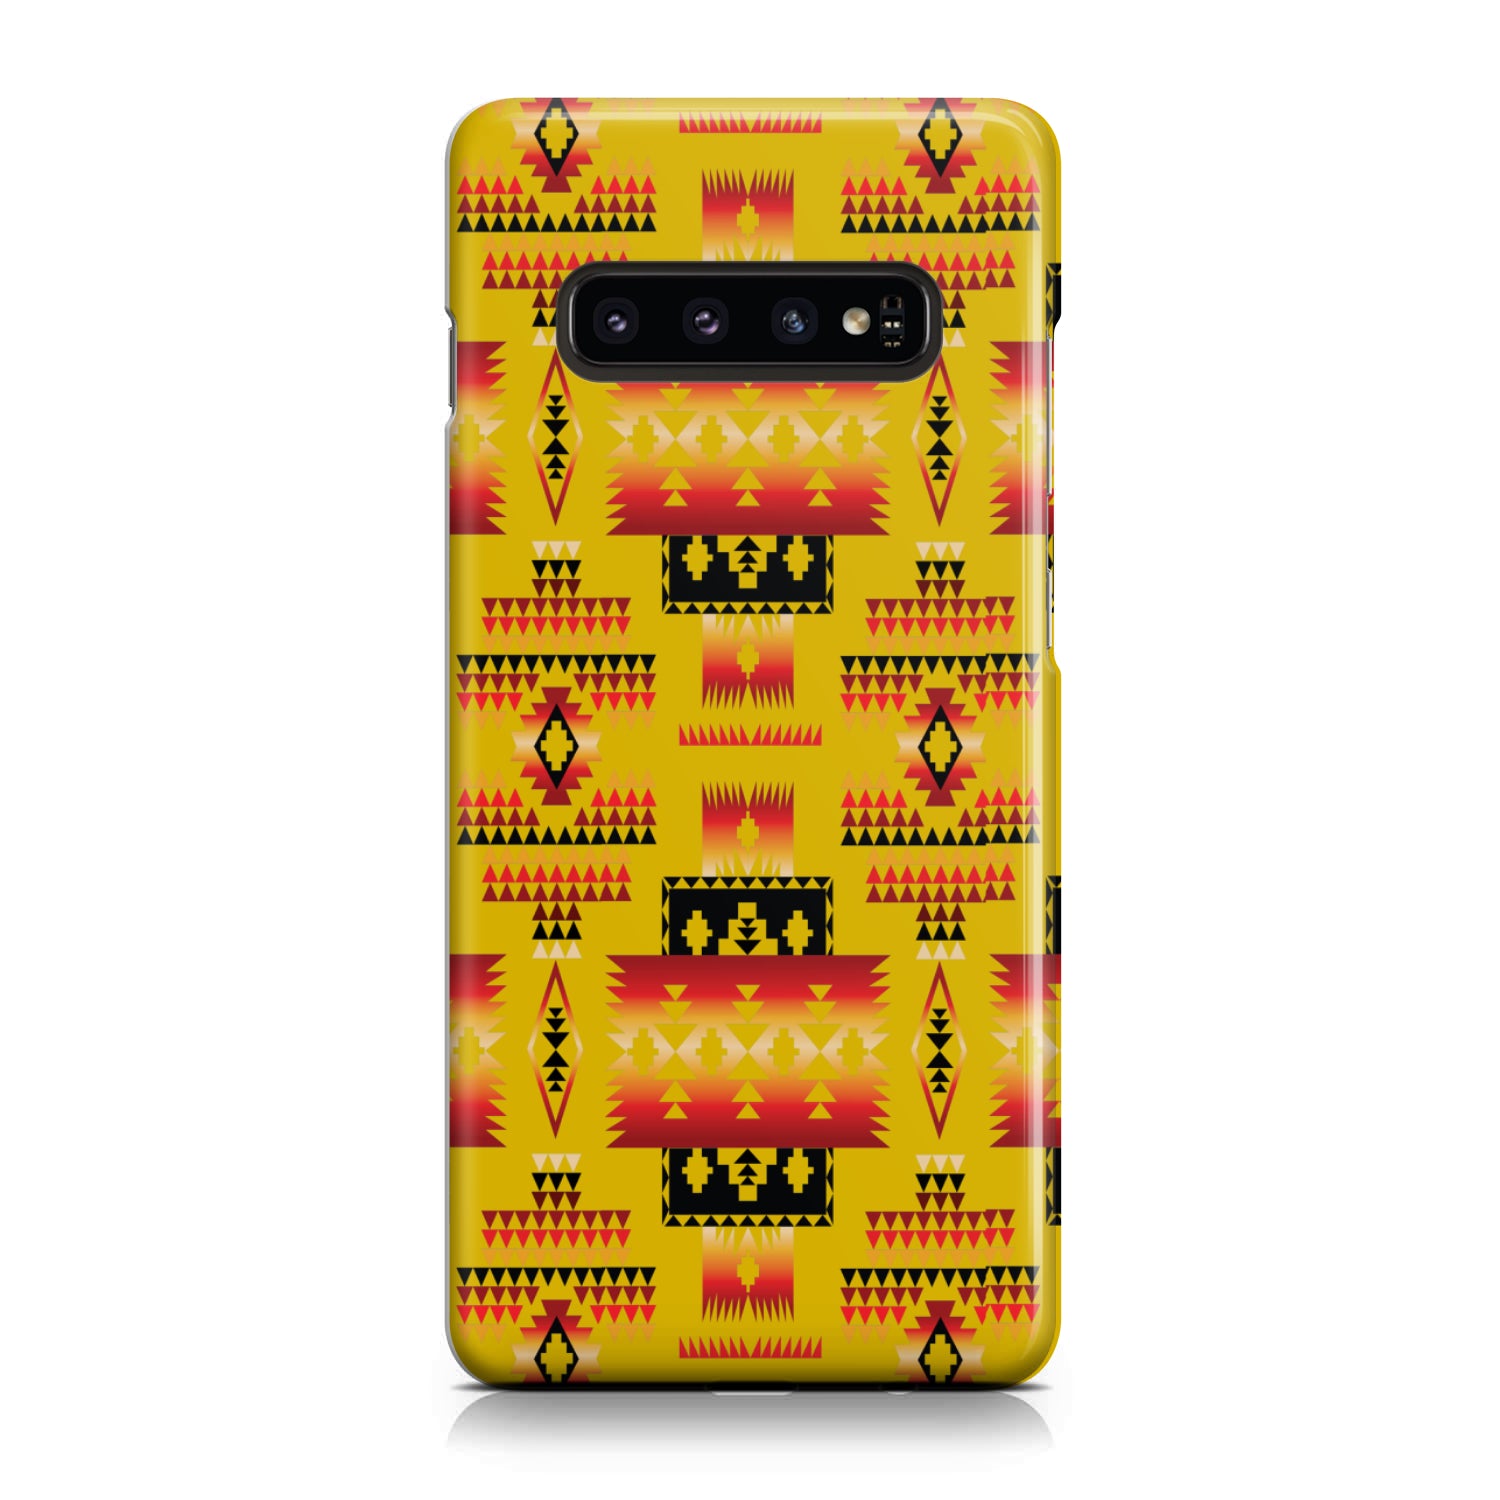 Powwow Store gb nat00302 02 yellow tribes pattern native american phone case